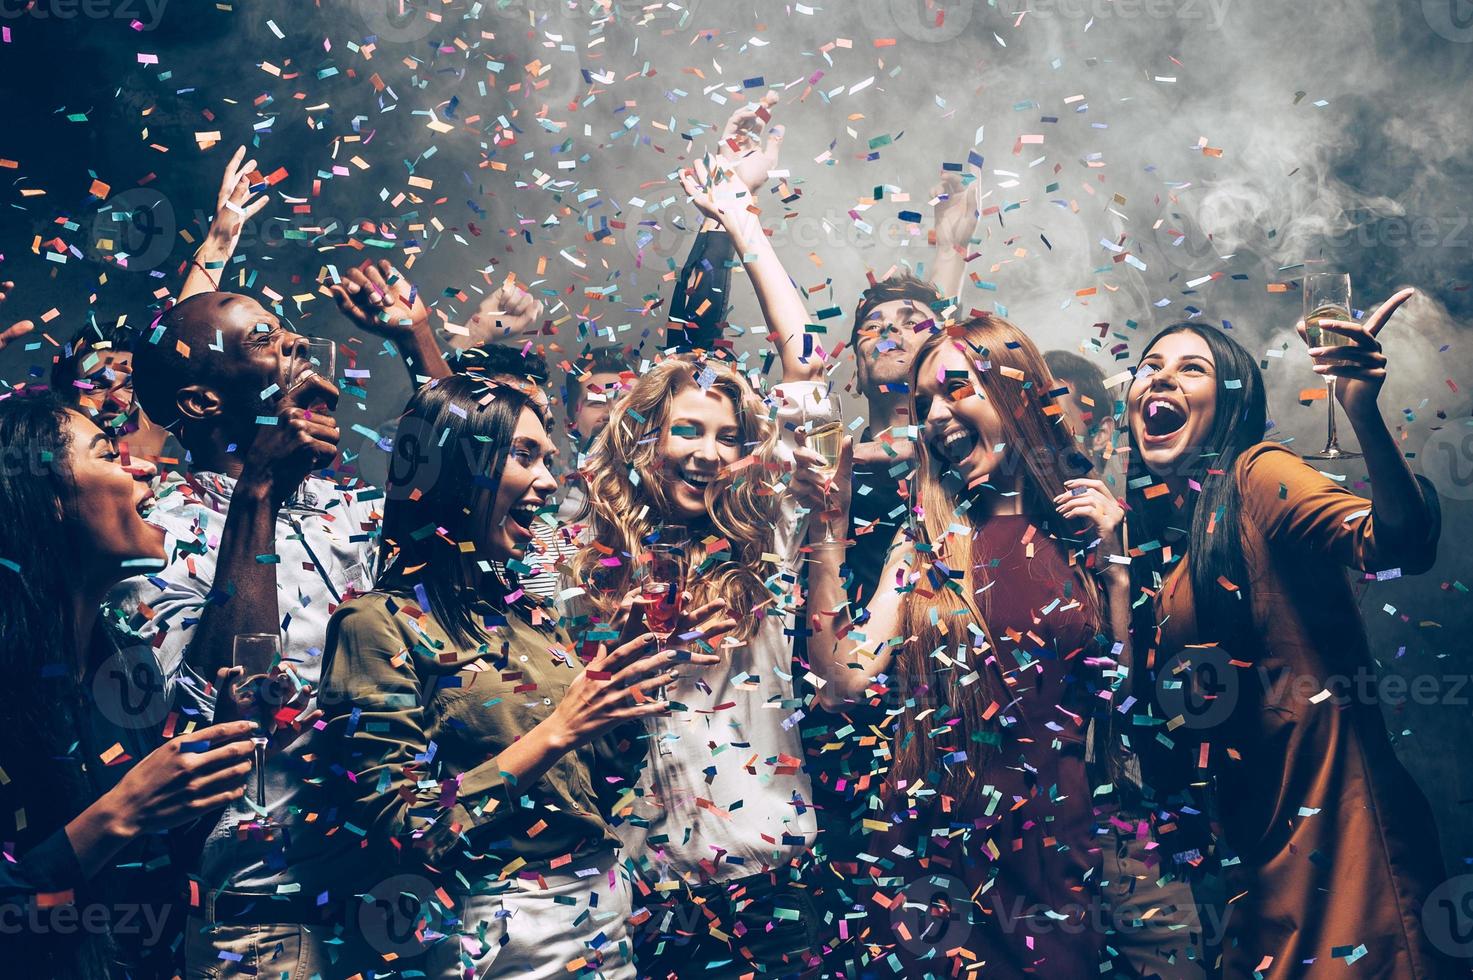 Fun in motion. Group of beautiful young people throwing colorful confetti while dancing and looking happy photo